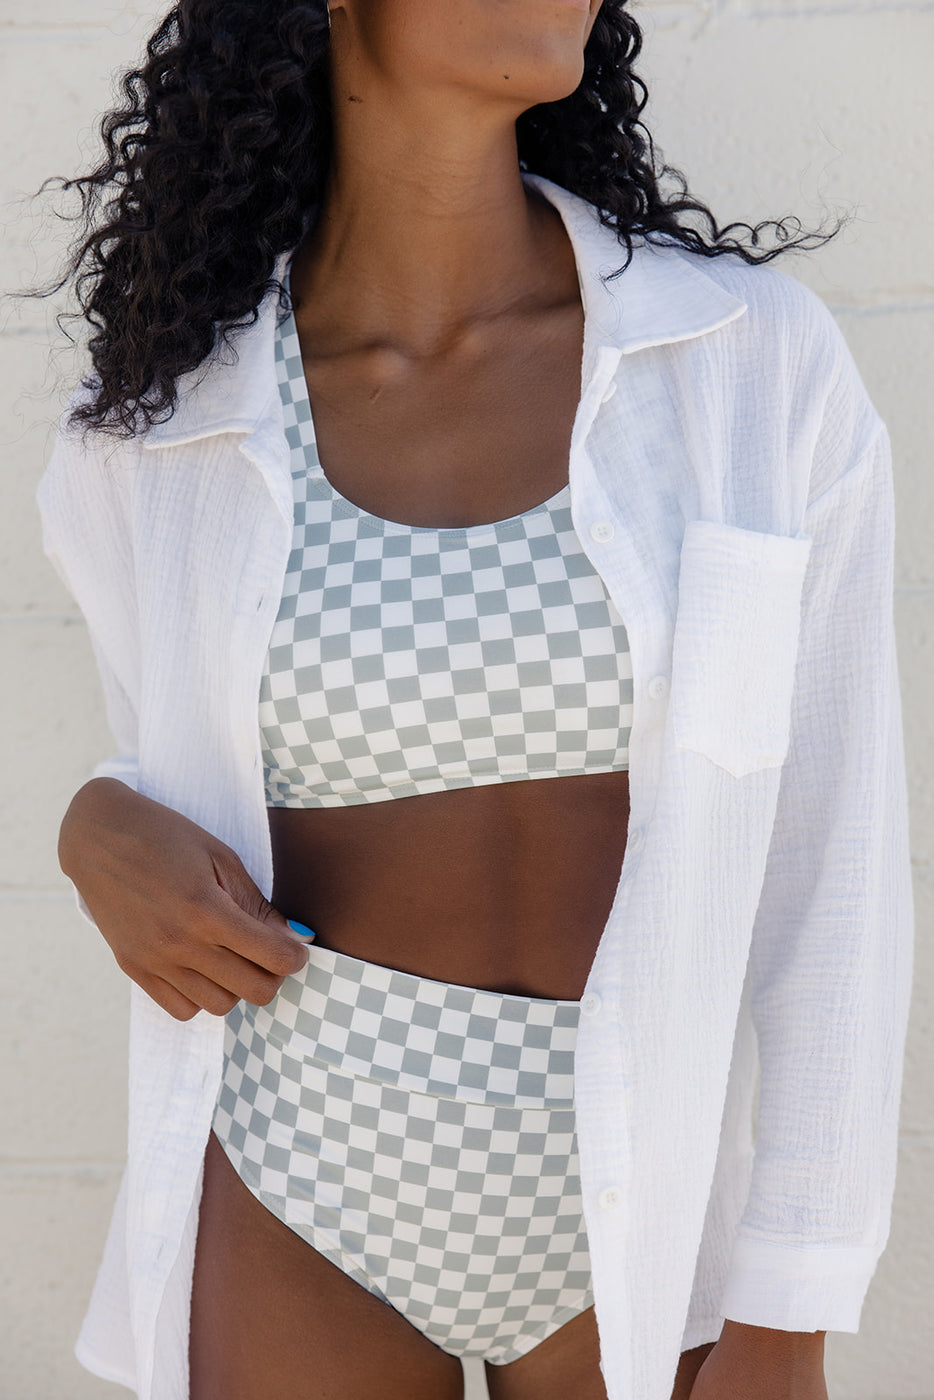 a woman wearing a white shirt and a checkered swimsuit